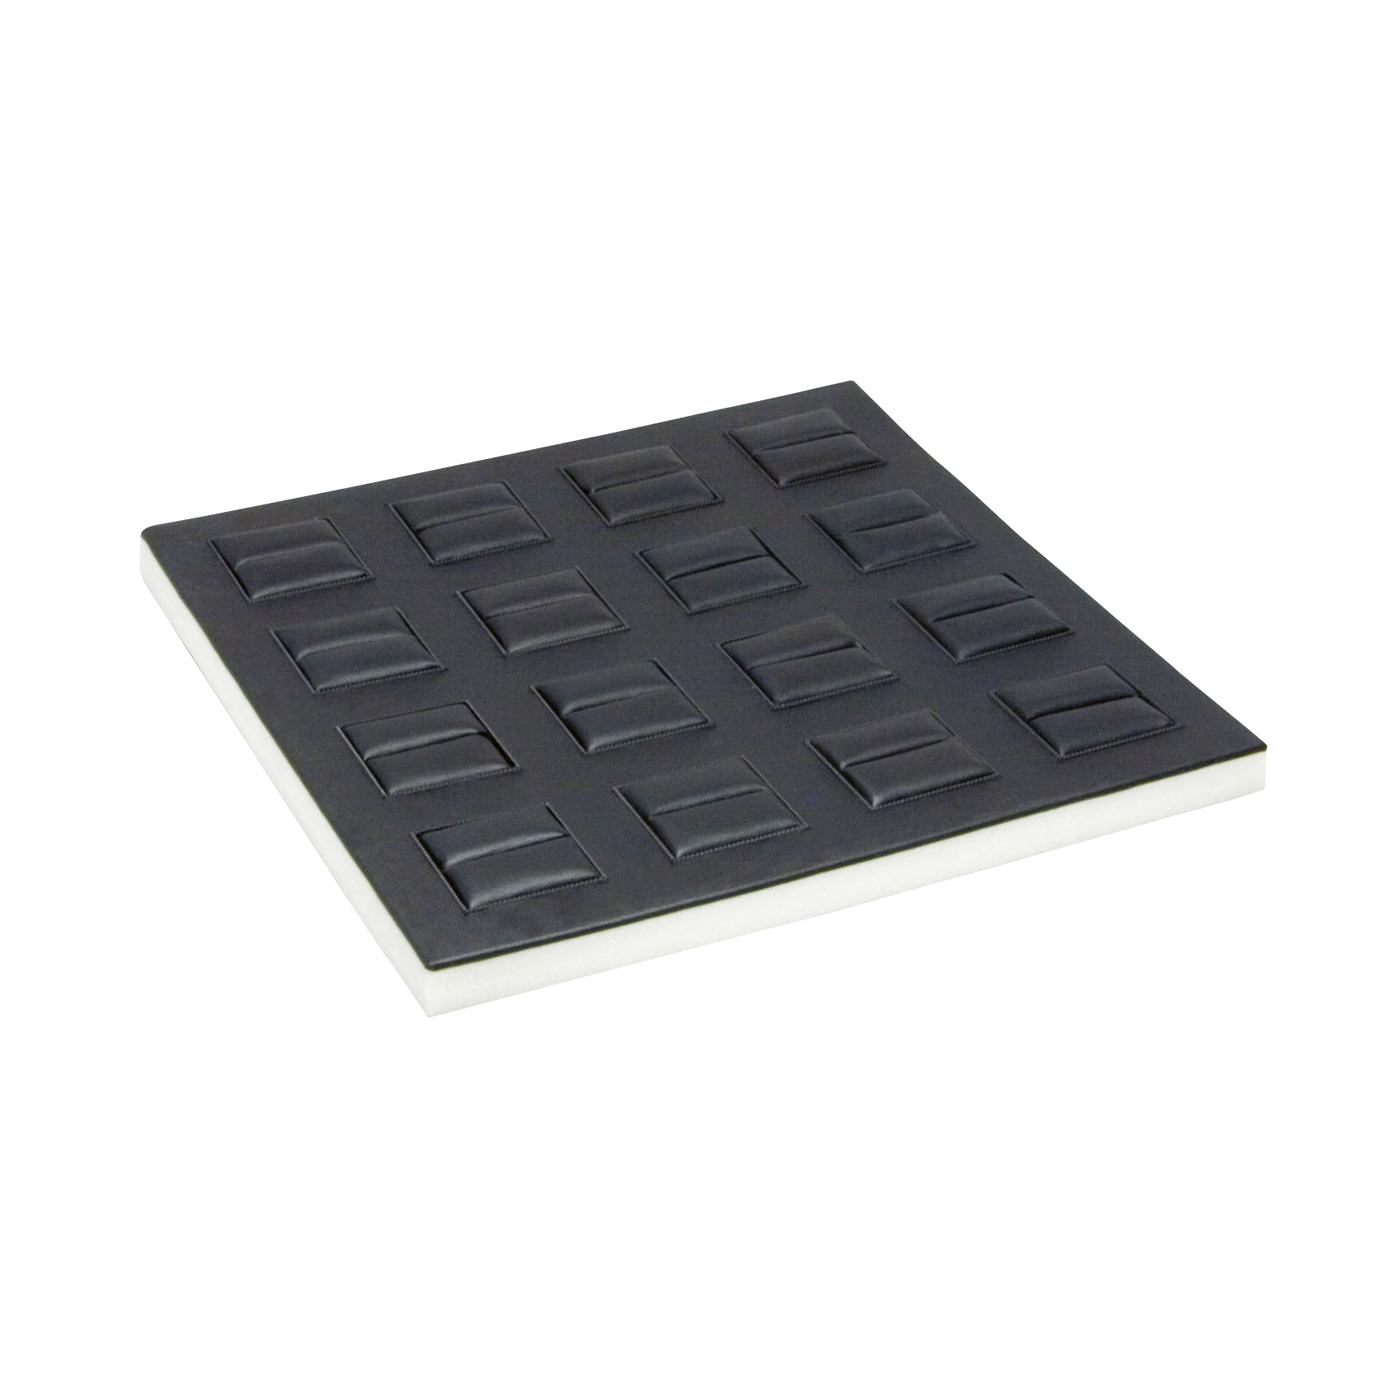 Tray System Inlay, Black, for 16 Rings, 224 x 224 mm - 1 piece